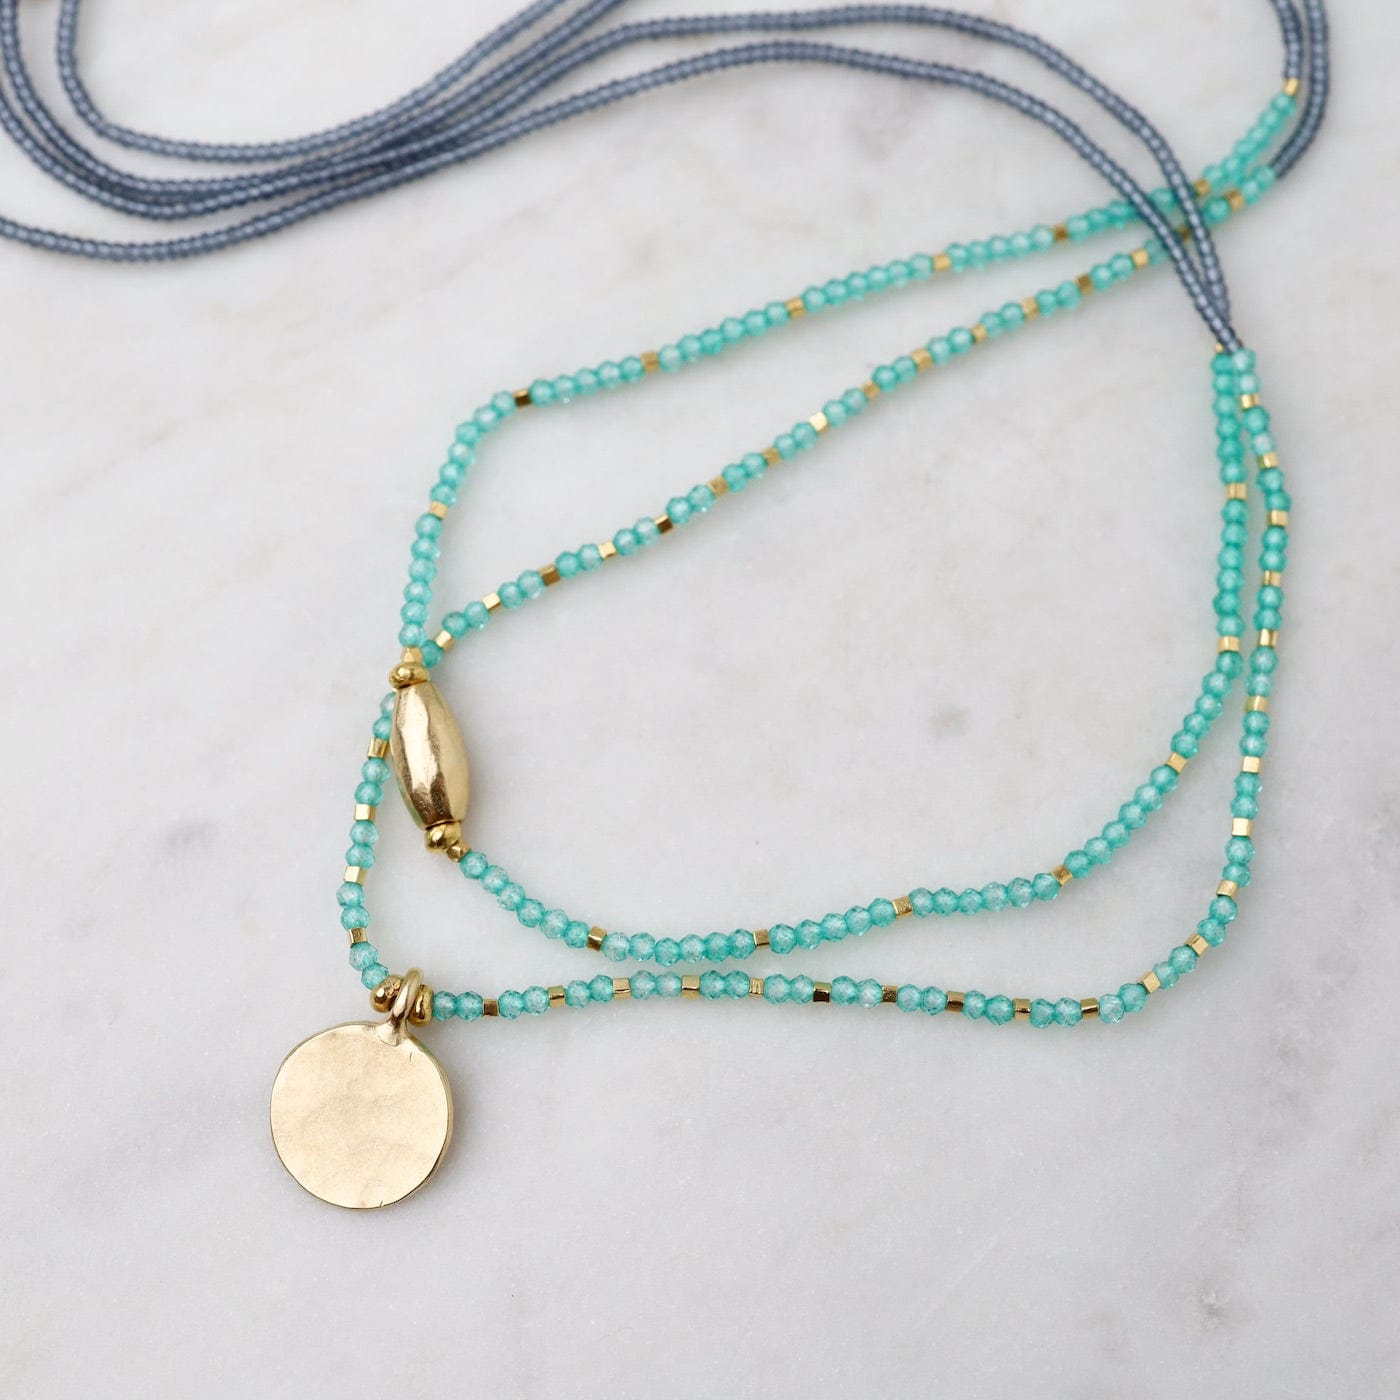 NKL Grey, Green Onyx & Gold Vermeil Hammered Disc Charm Necklace